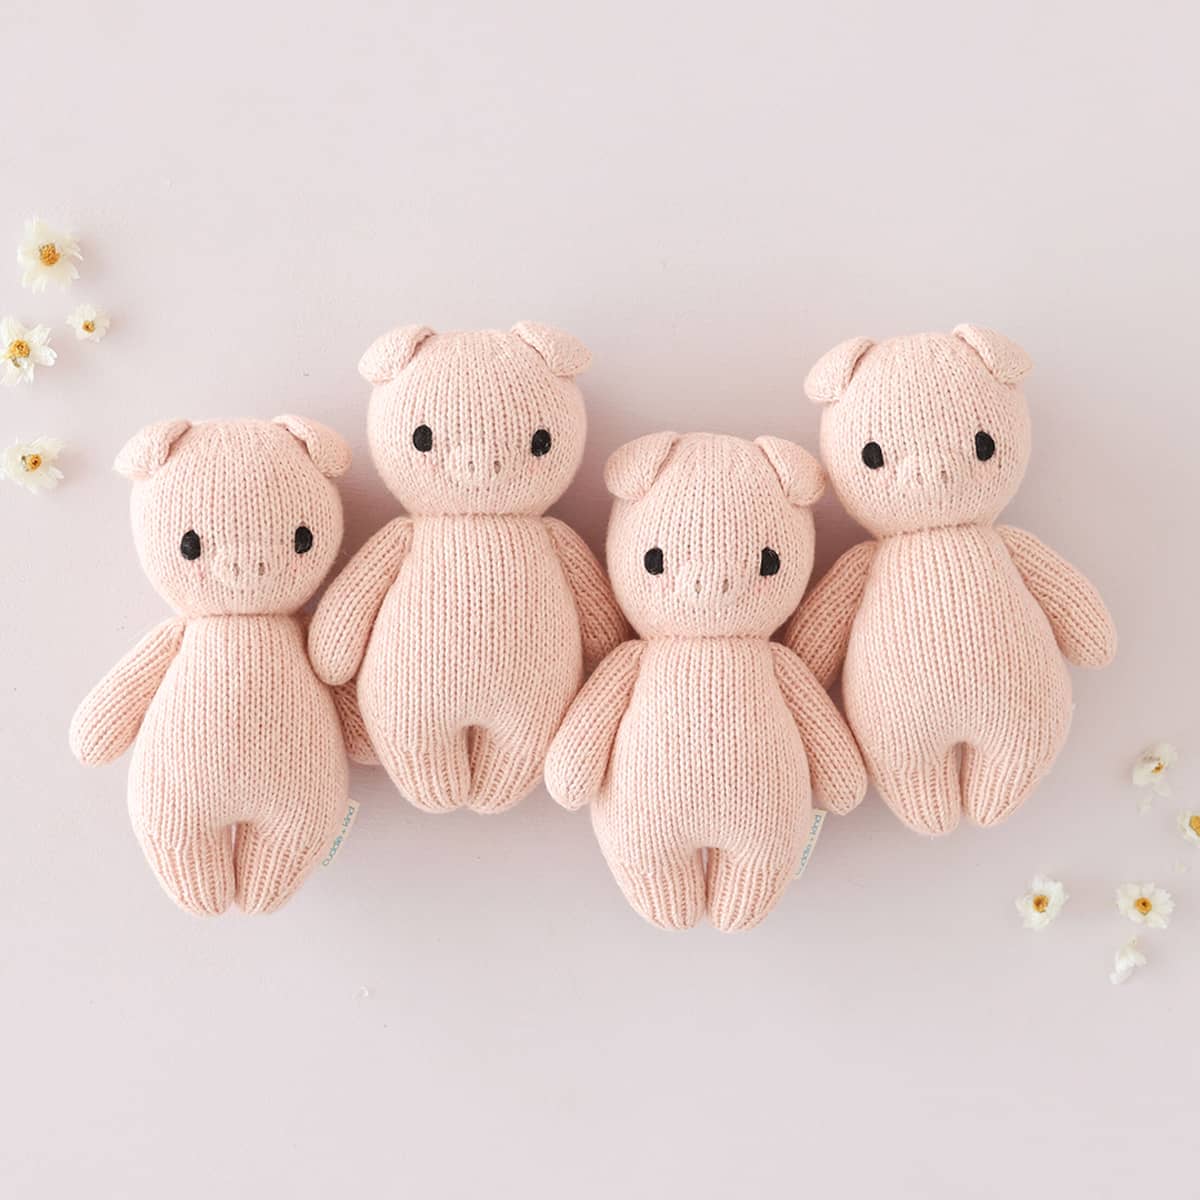 Cuddle + Kind Hand-Knit Doll - Baby Piglet